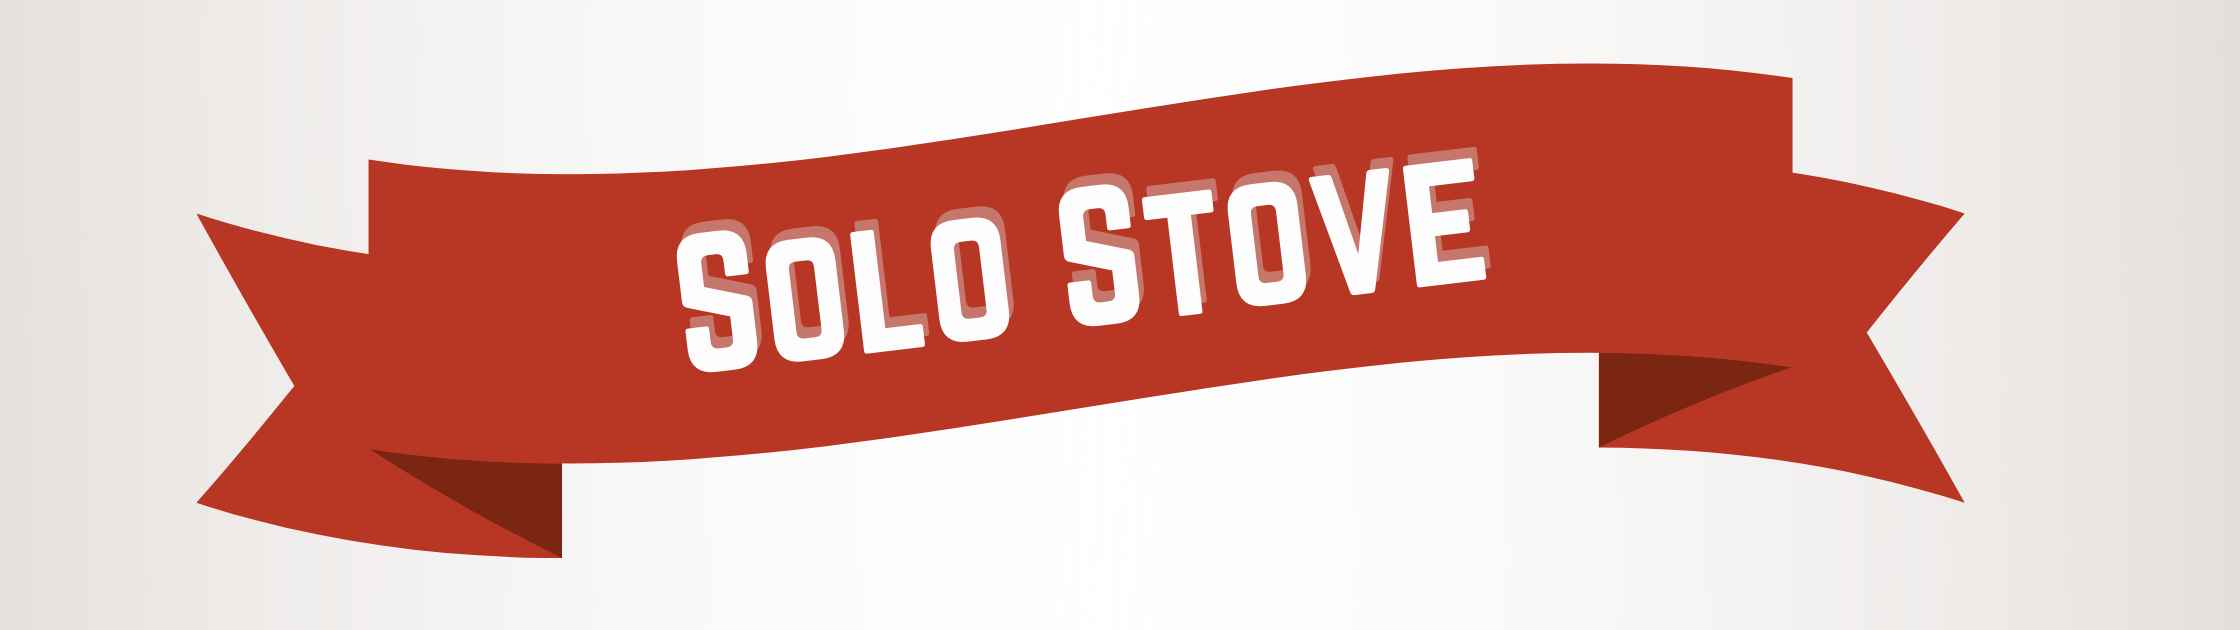 Solo Stove on red holiday banner